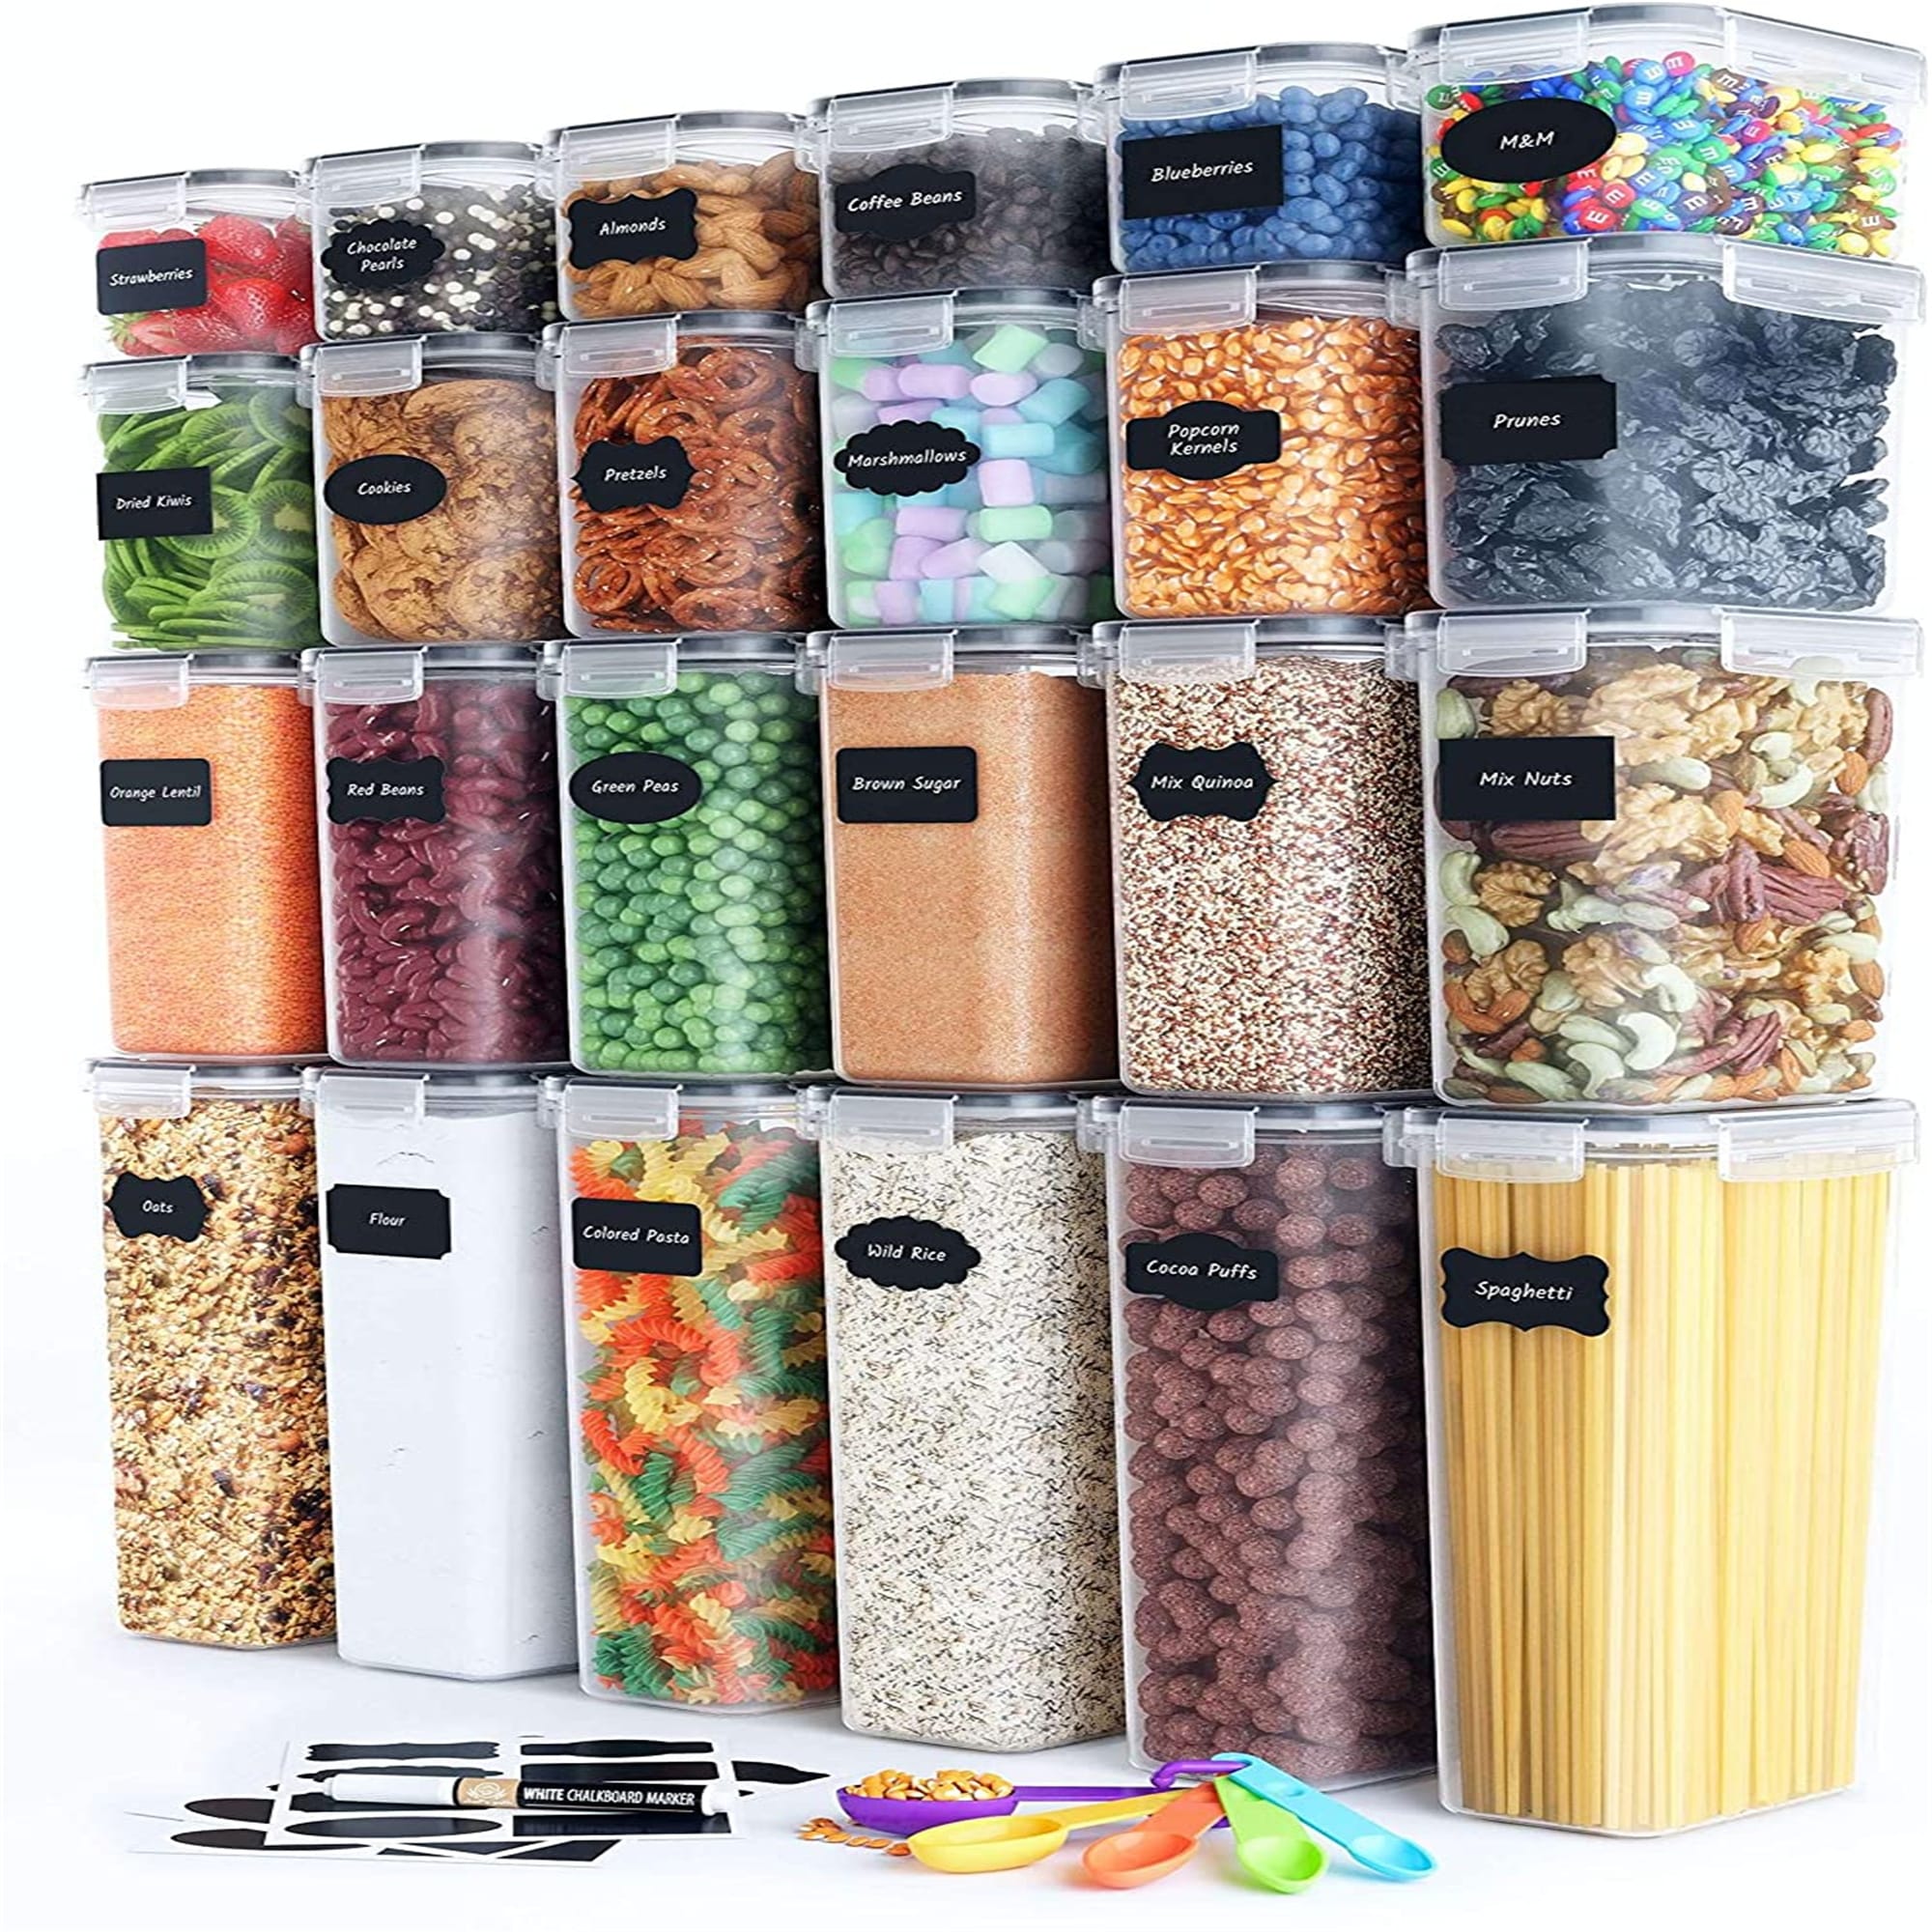 Ogrmar Airtight Food Storage Containers Set with lids,42 Pcs Plastic Kitchen and Pantry organization,bpa Free Storage Contain